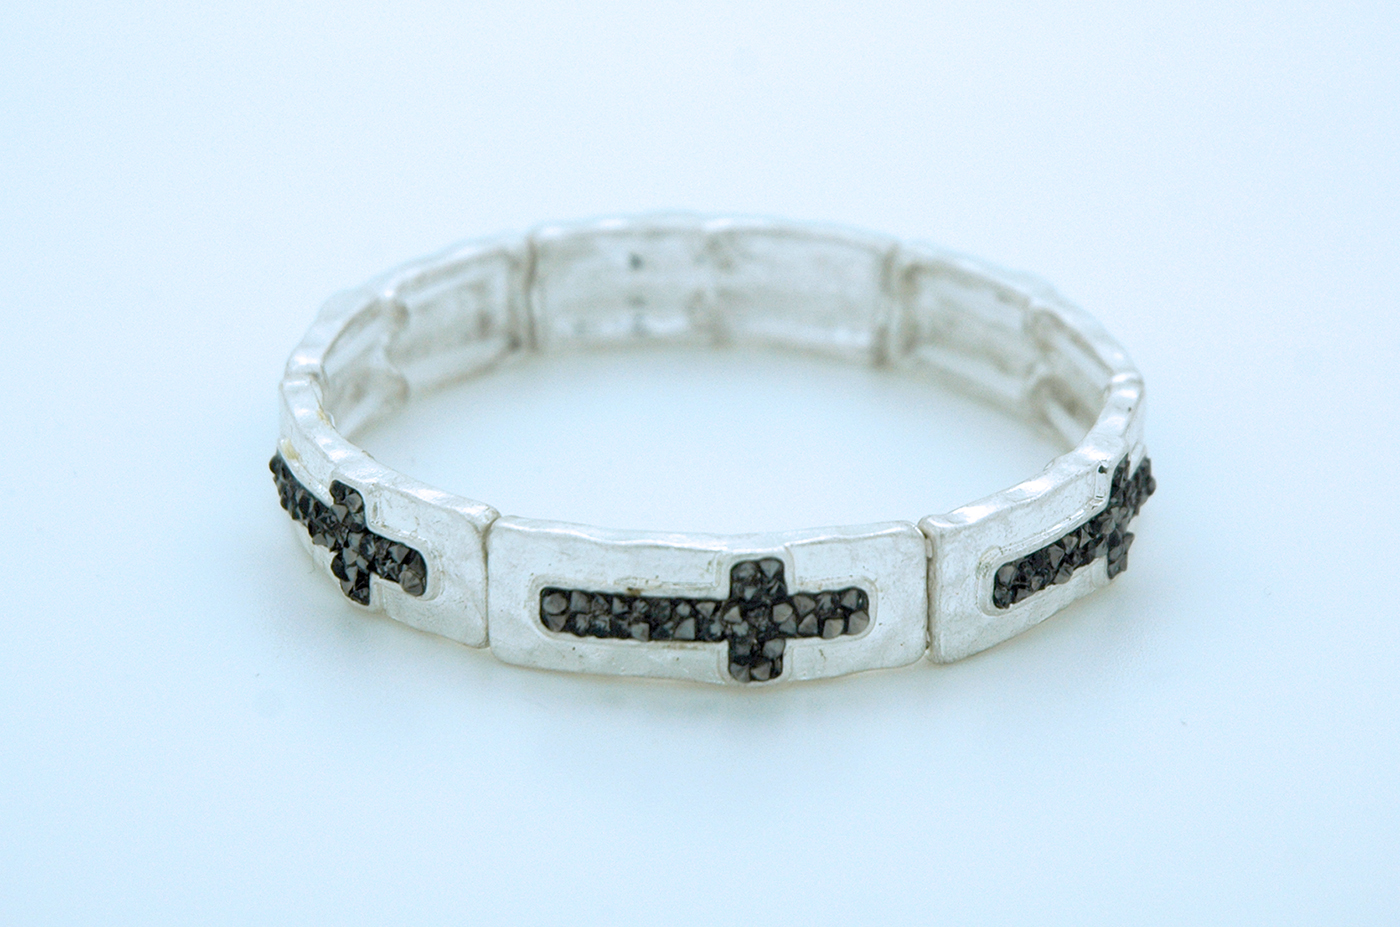 CU5843 - Thin Silver Bracelet, Small Hematite Colored Crystal Crosses